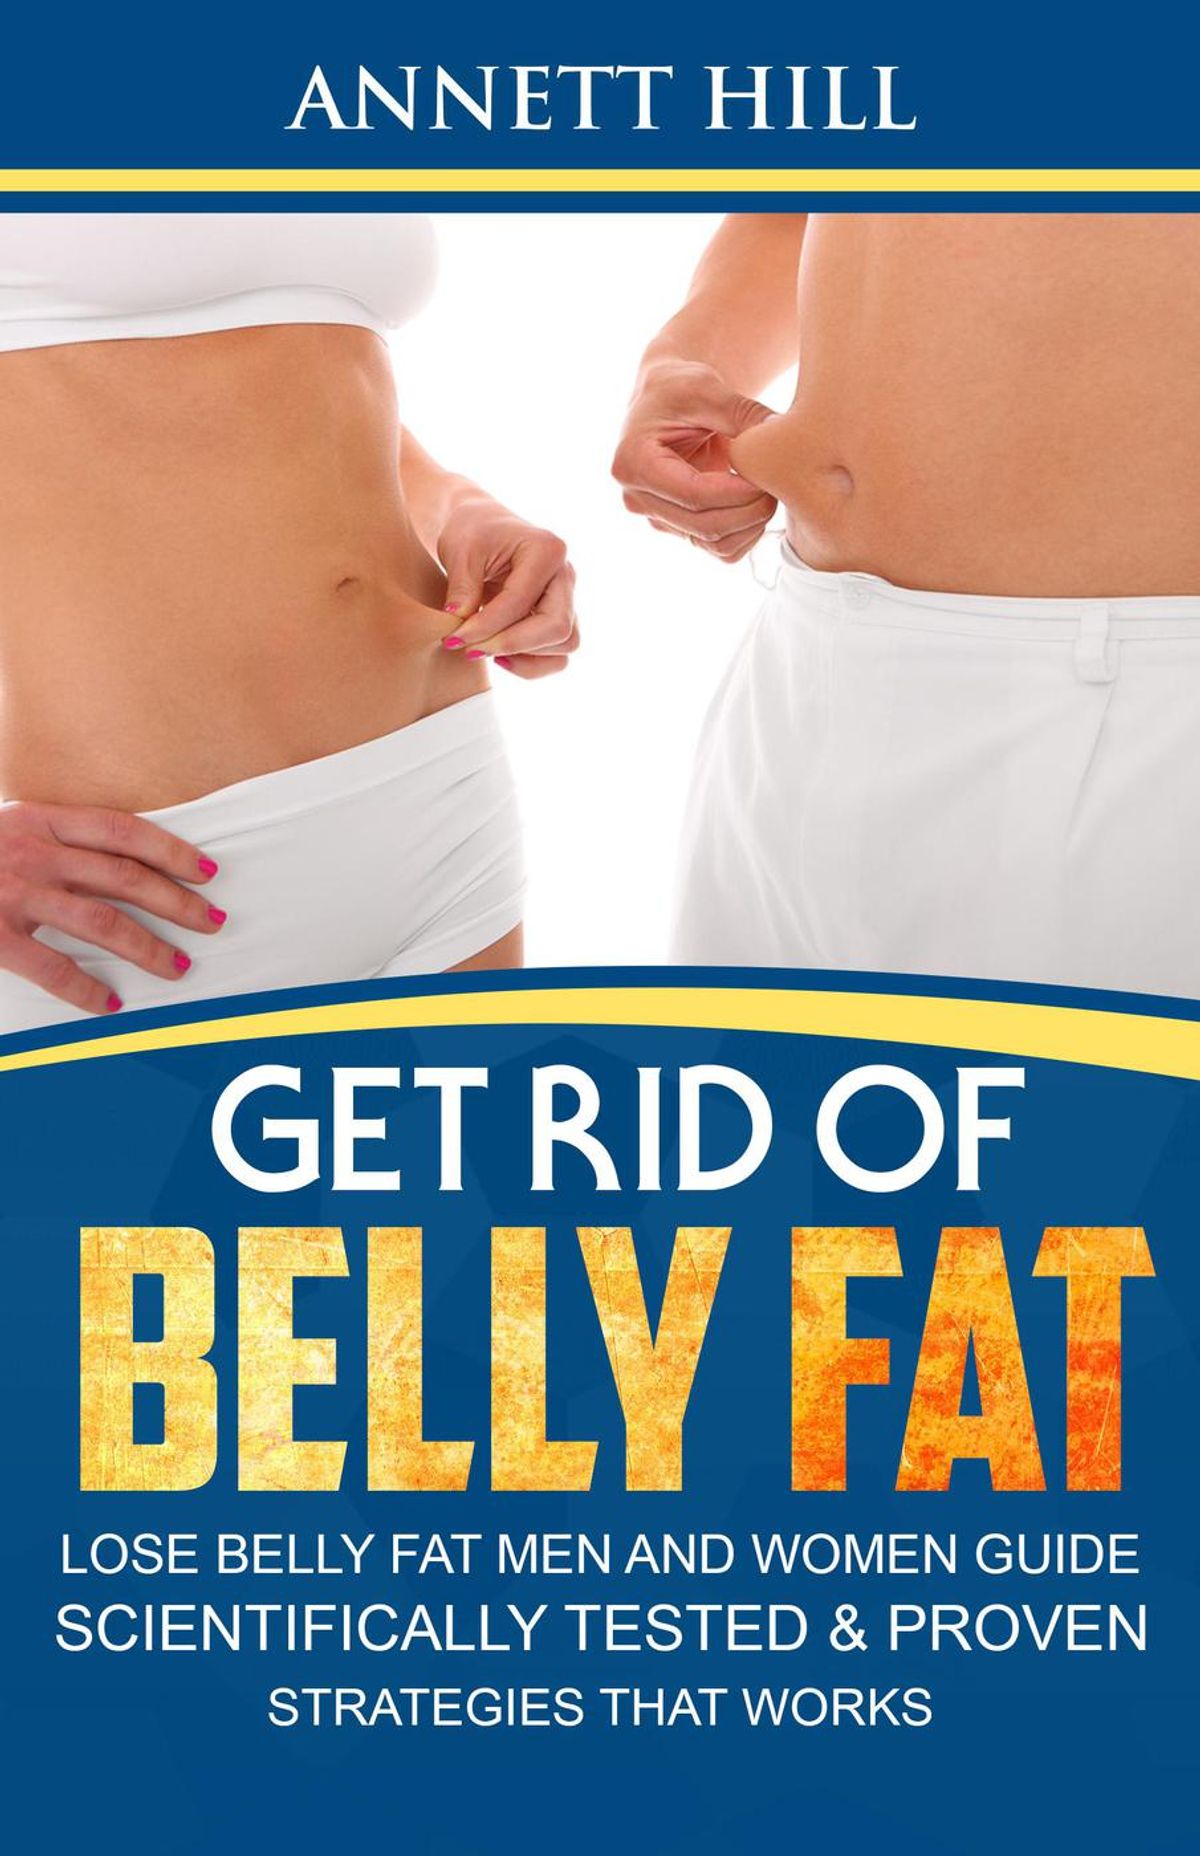 Get Rid of Belly Fat: Lose Belly Fat Men and Women Guide ...